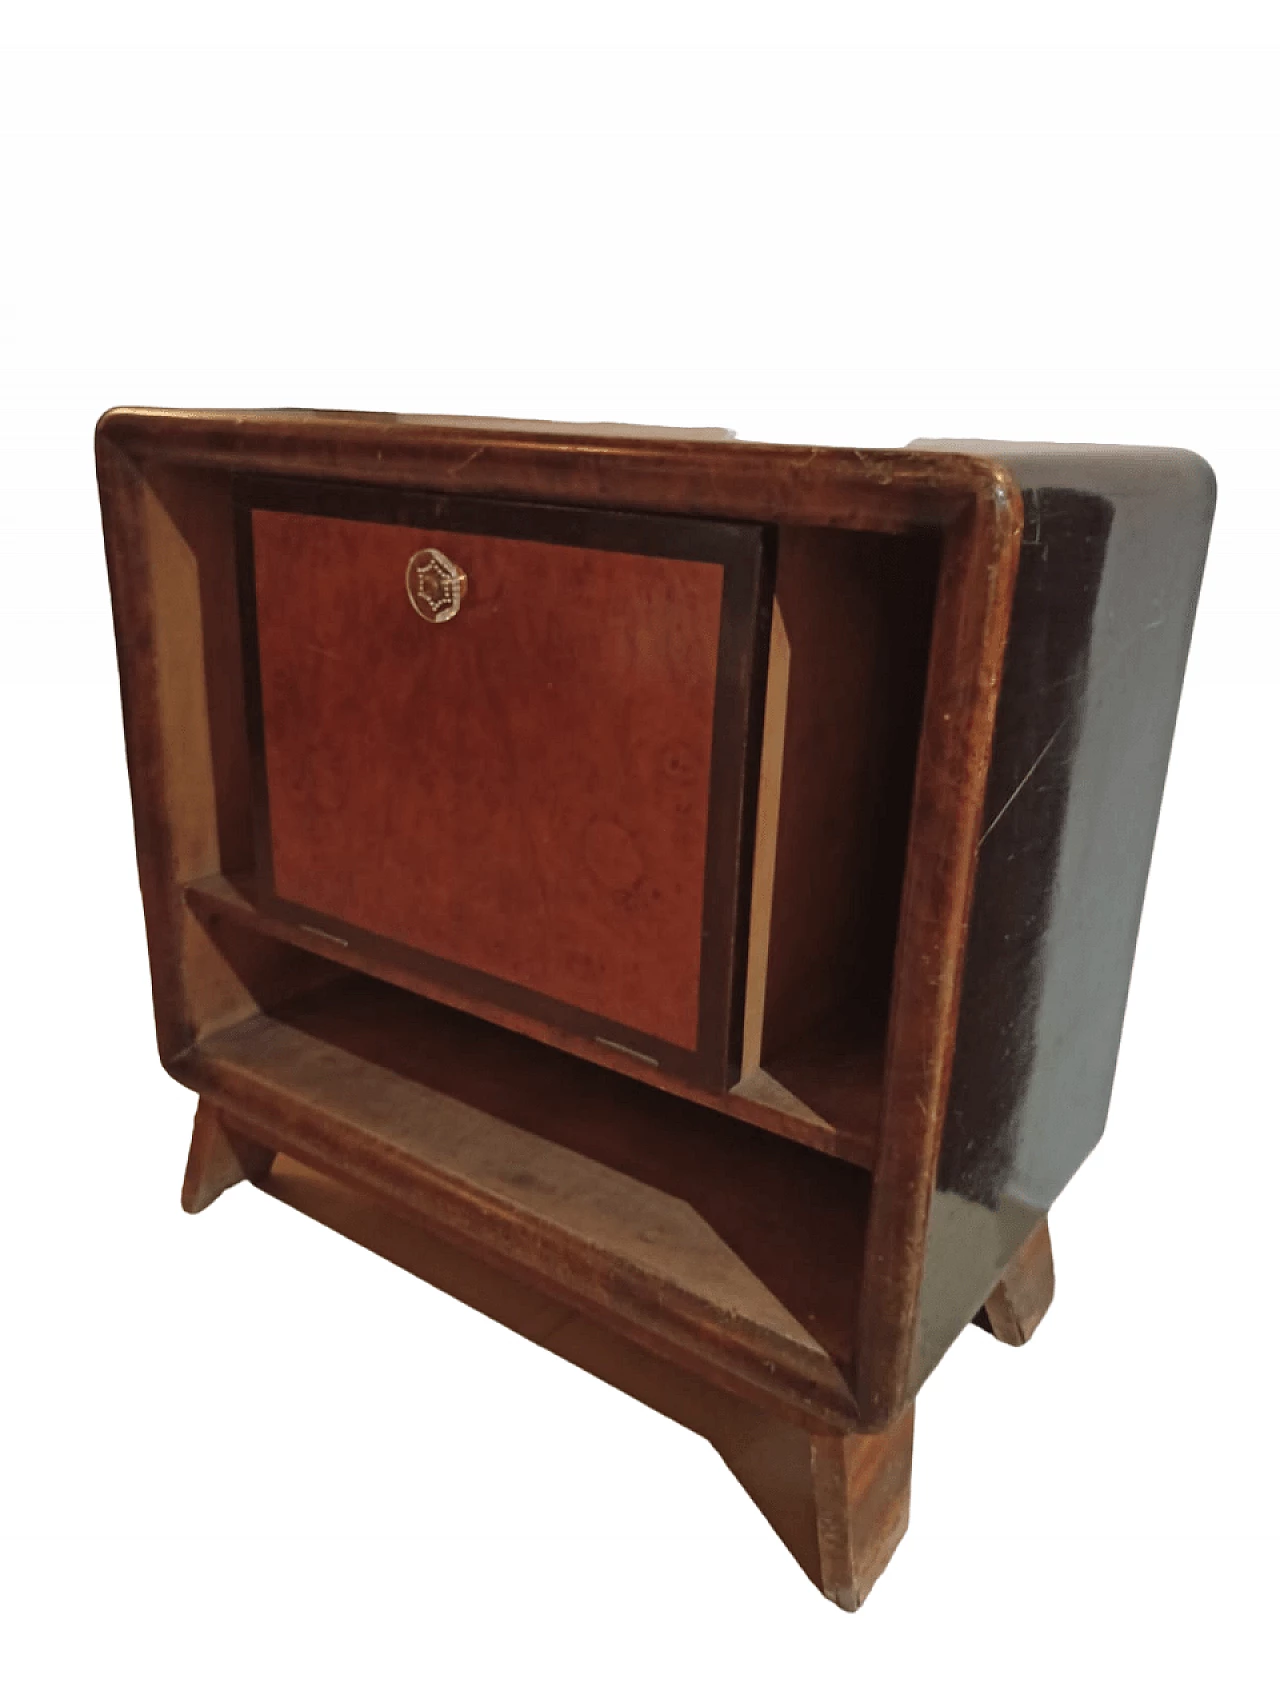 Rootwood-finish cabinet with Art Deco concealed turntable, 1940s 2